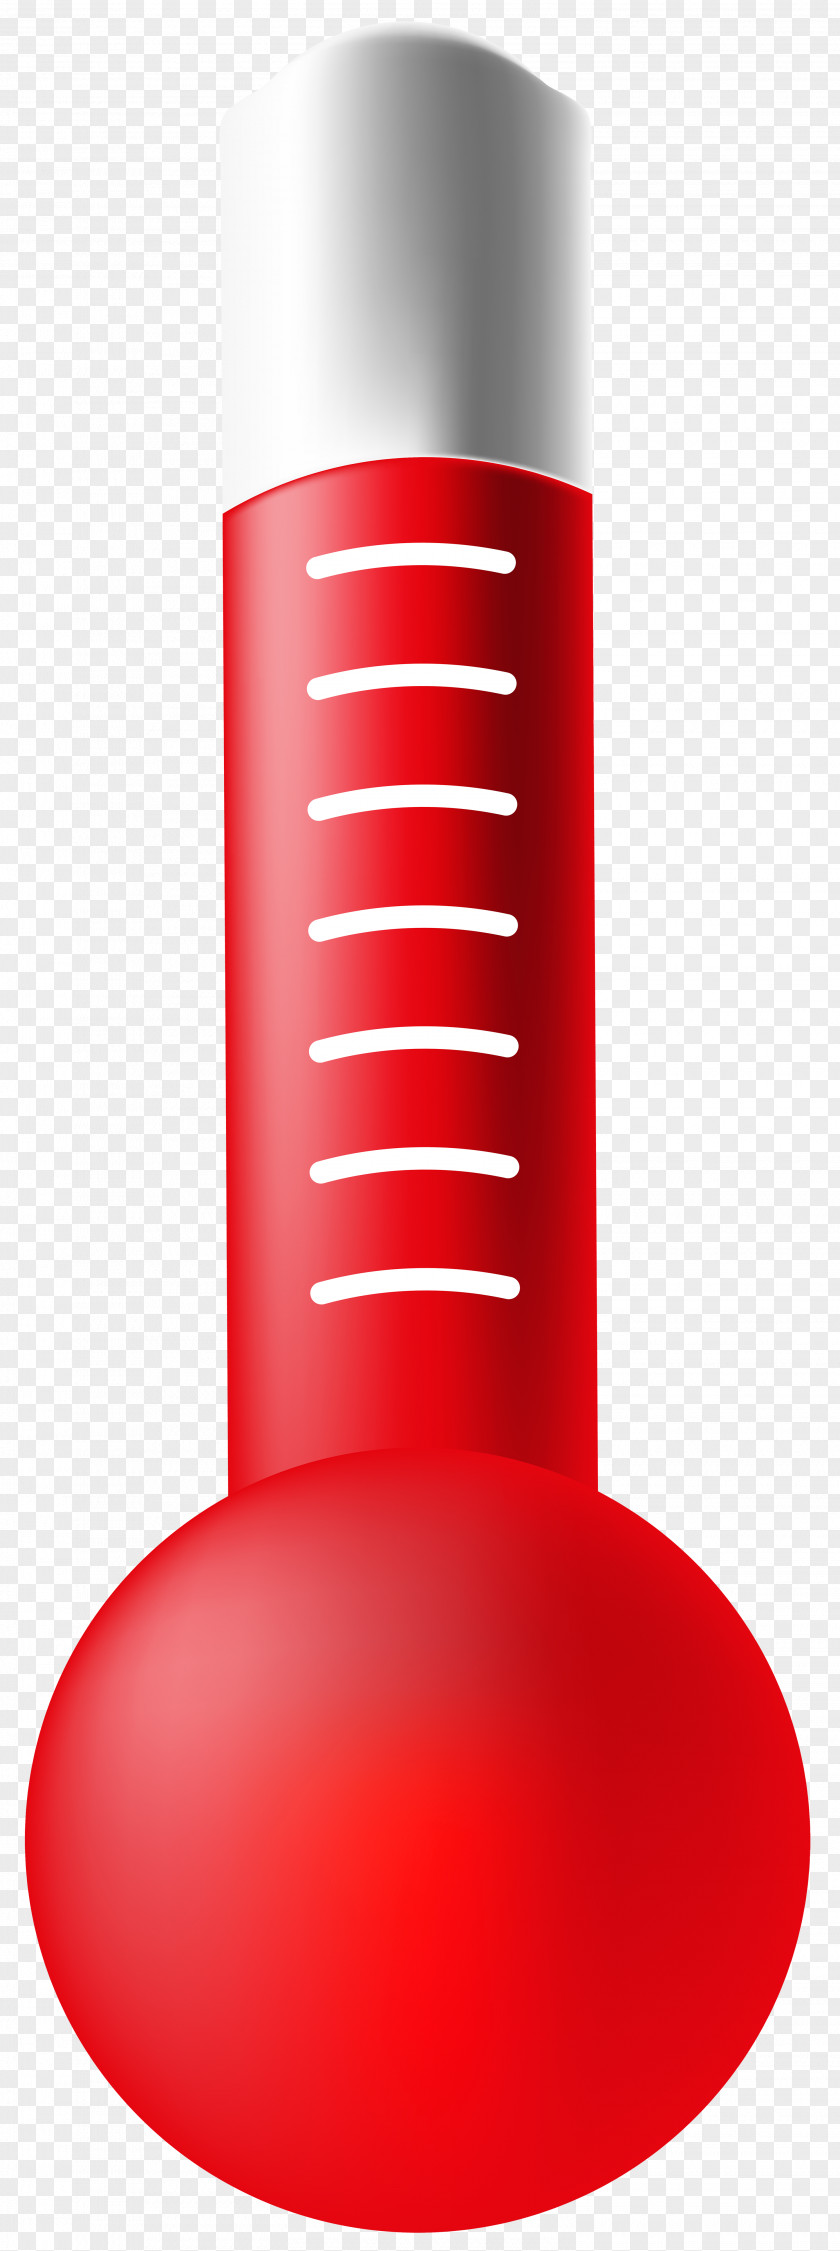 Video Thermometer Clip Art PNG